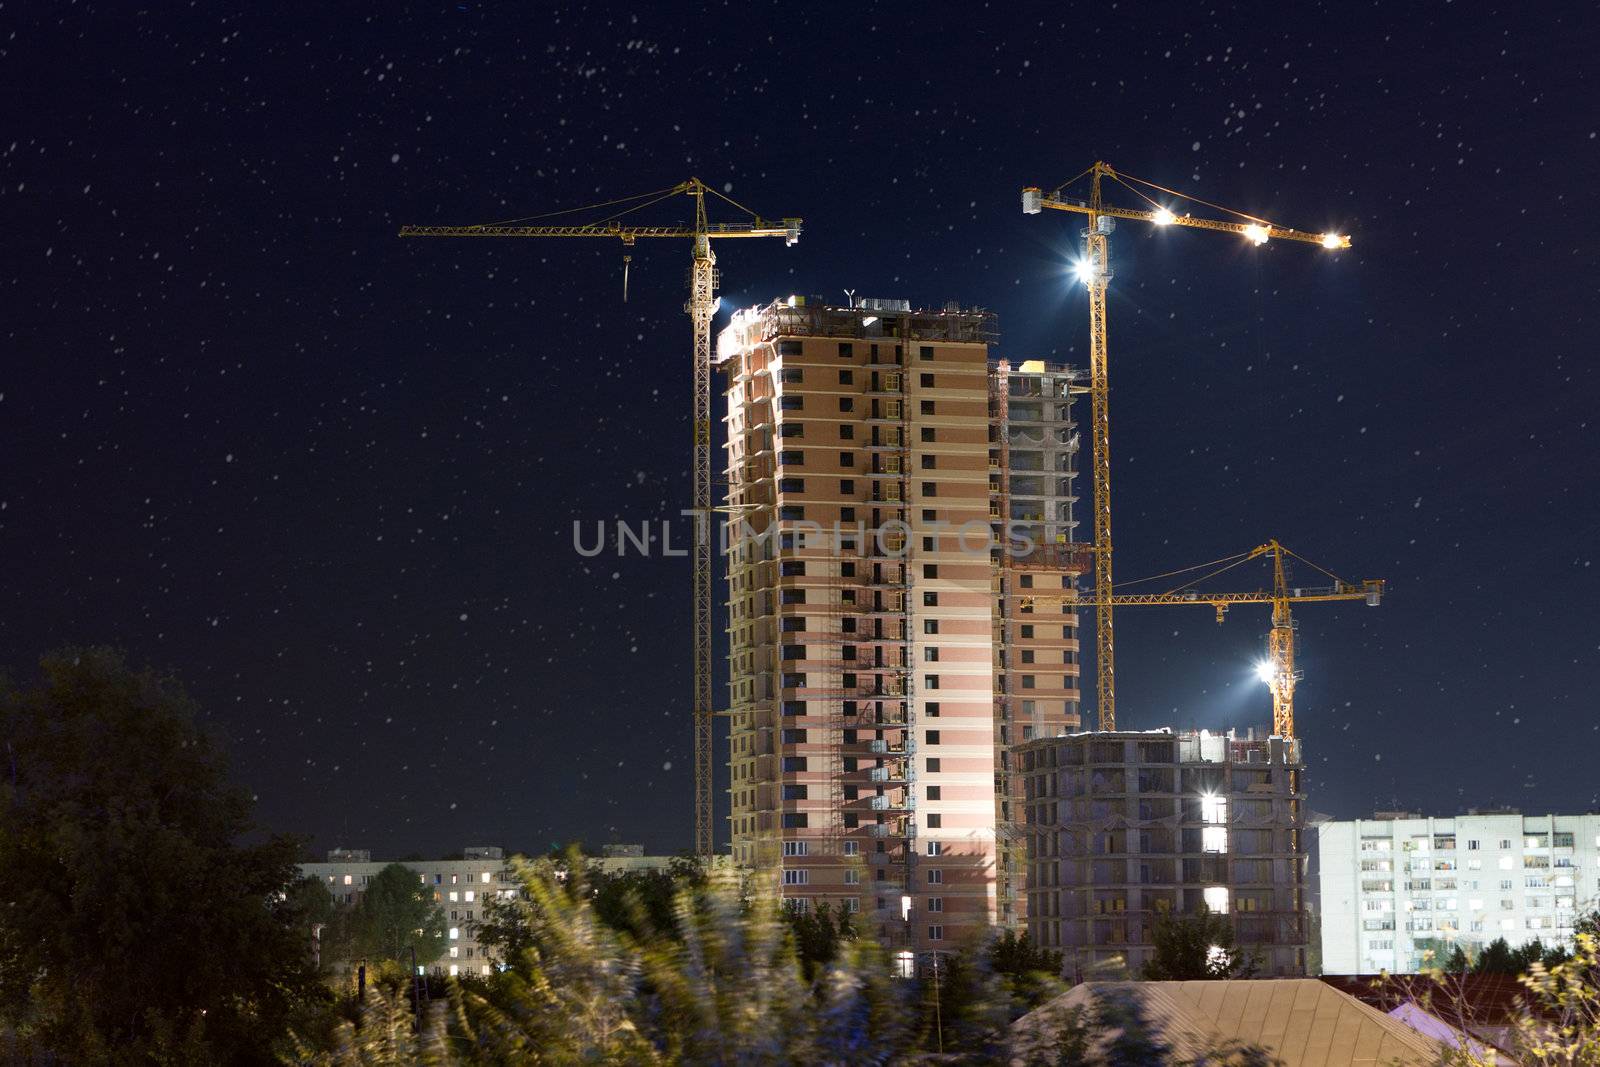 construction site at night by nigerfoxy